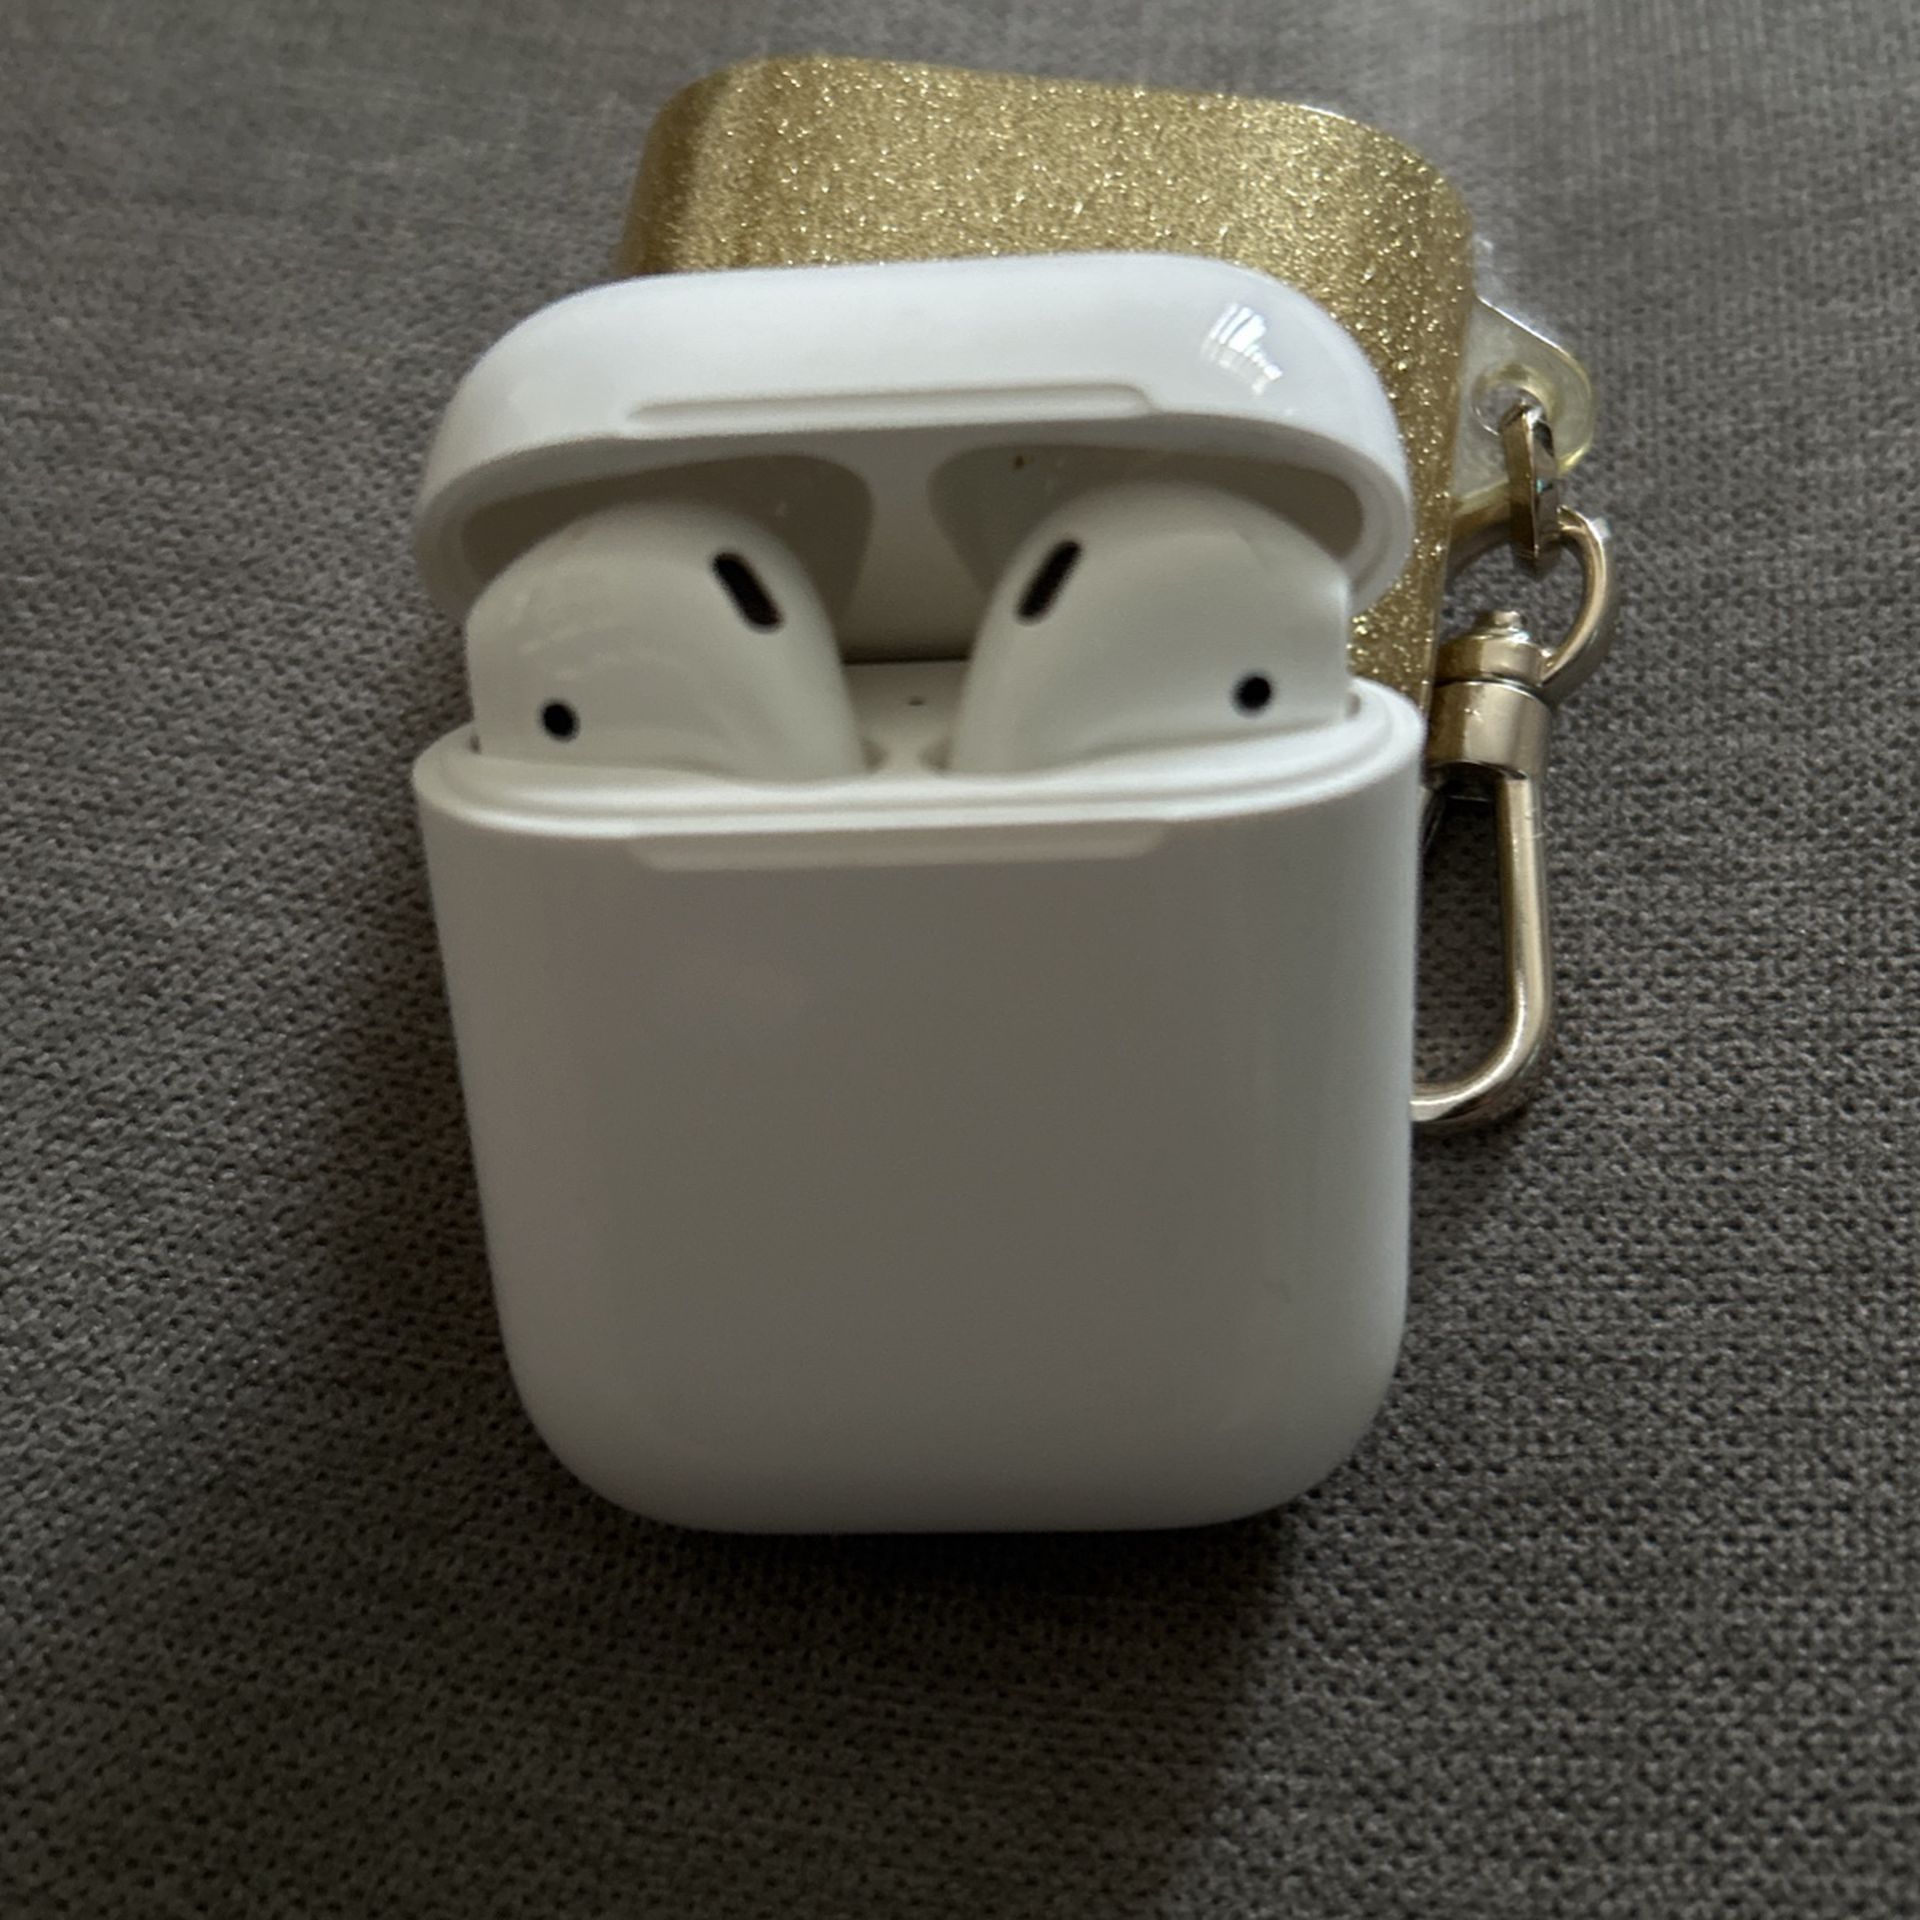 Apple AirPods + Kate Spade Cases 